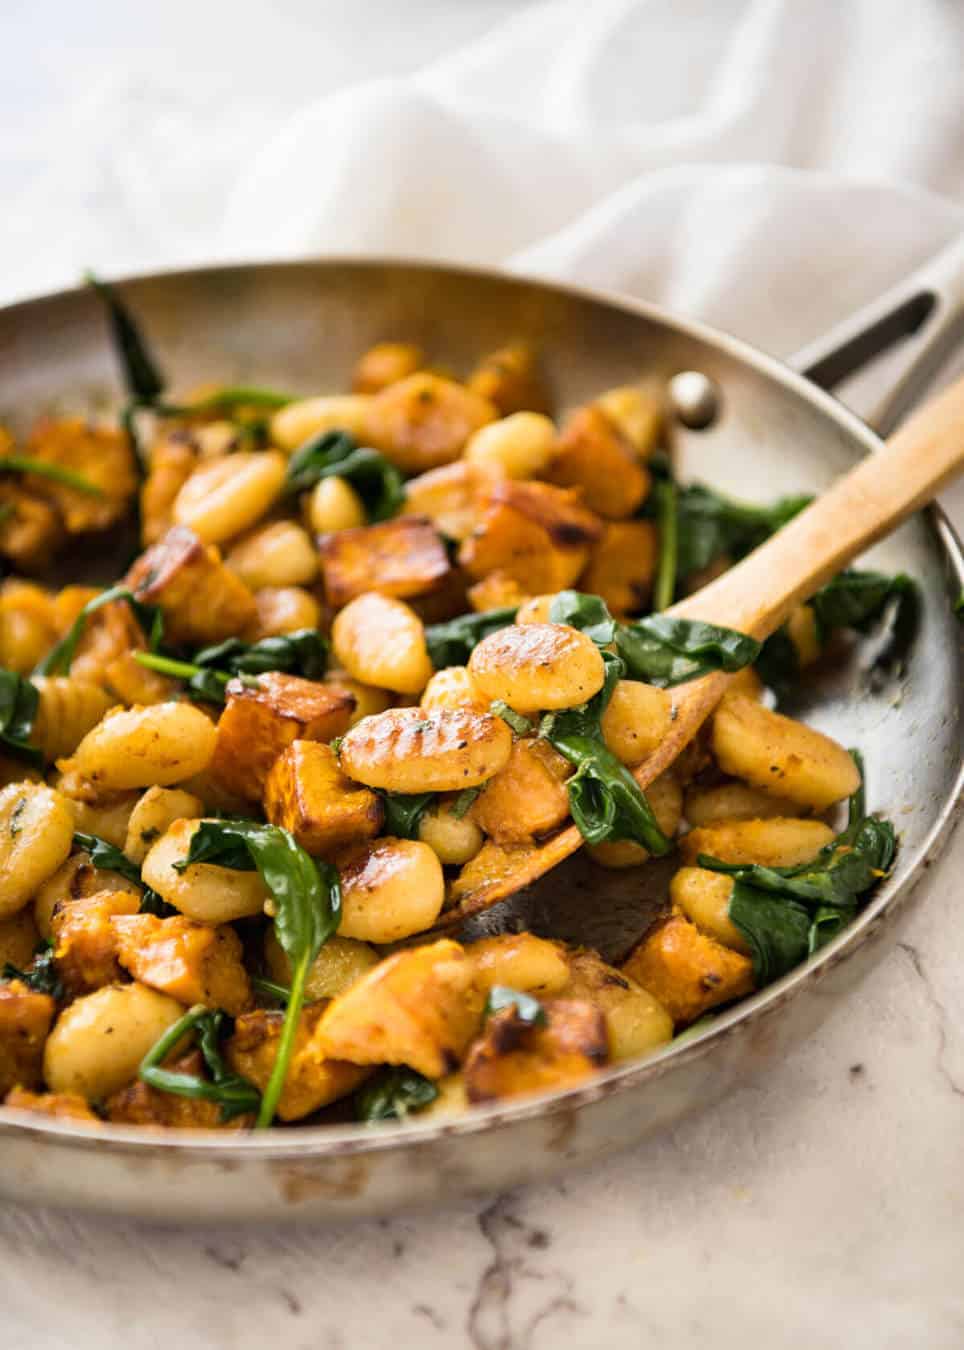 Pan Fried Gnocchi with Pumpkin and Spinach - Golden crispy on the outside, soft on the inside, with a butter sage sauce, roasted pumpkin and spinach. www.recipetineats.com